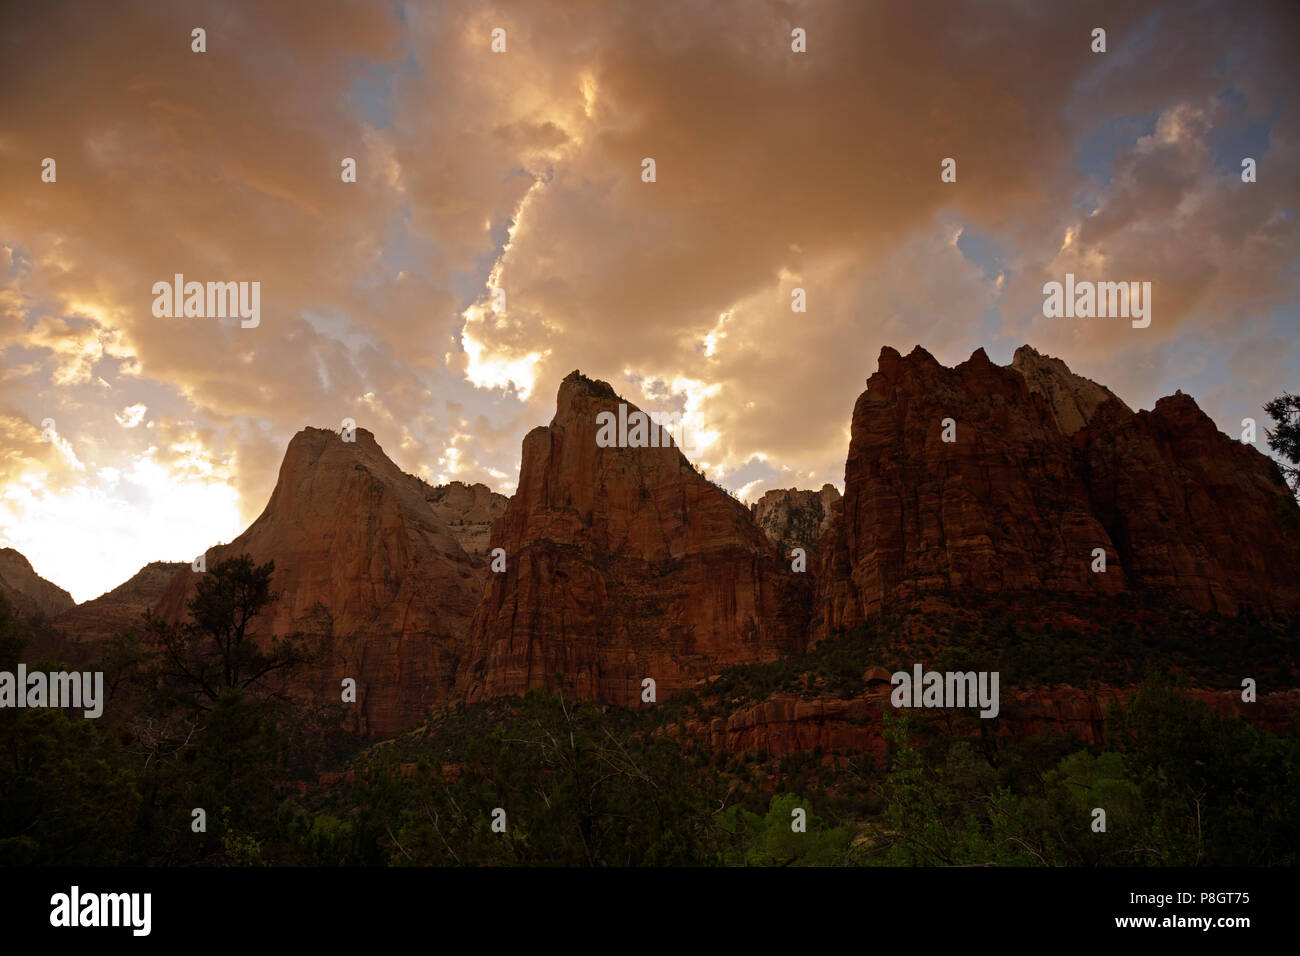 UT00437-00...UTAH - Sunset over the Court of the Patriarchs in the Zion Canyon area of Zion National Park. Stock Photo